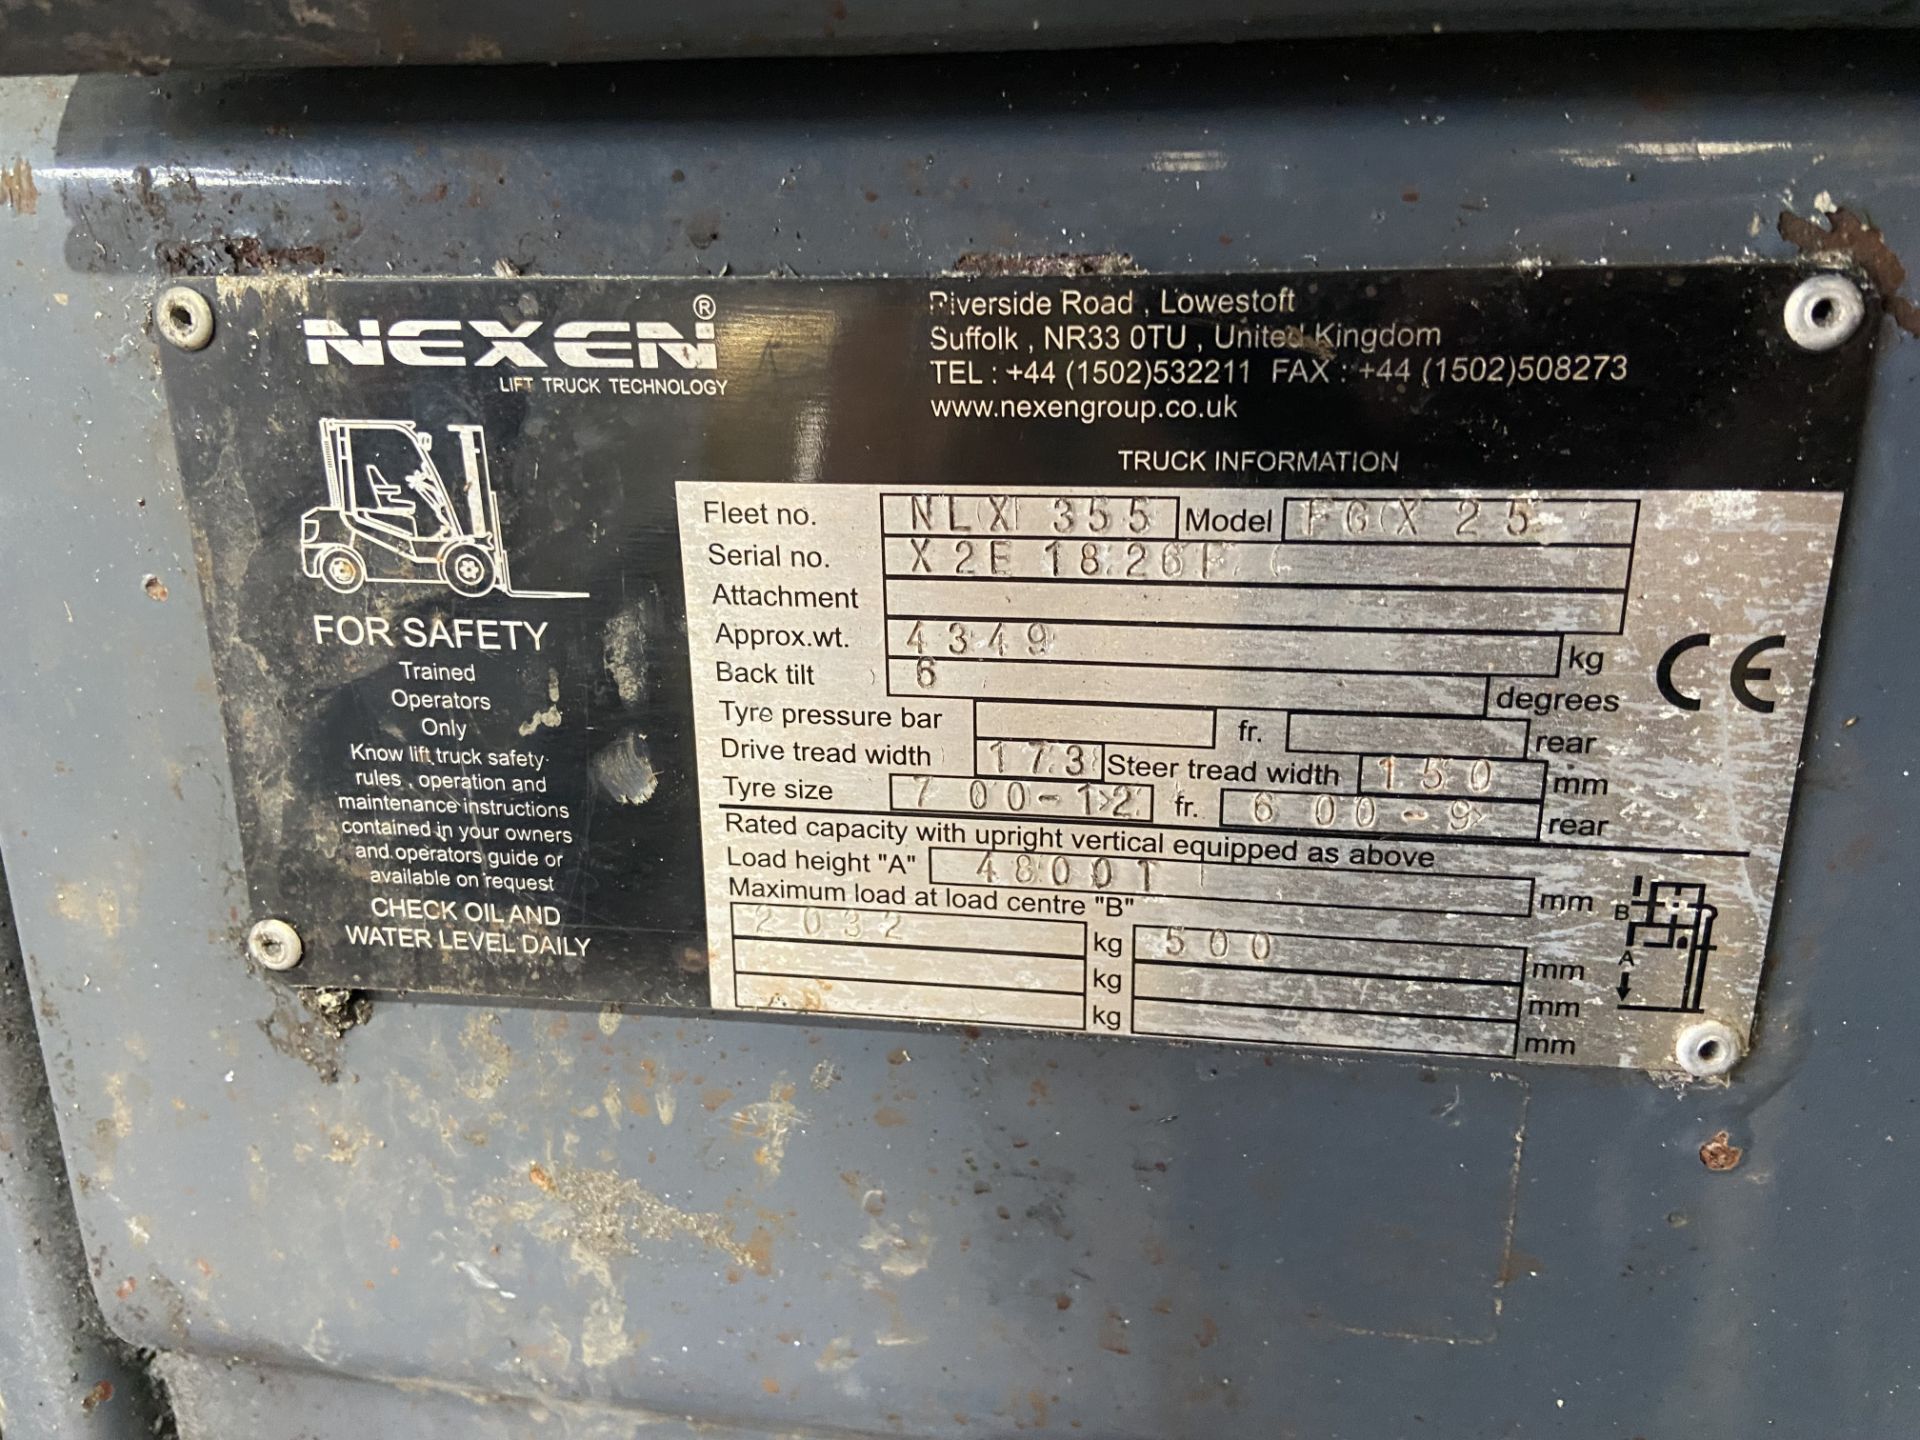 Nexen FGX25 2300kg cap. LPG Fork Lift Truck, serial no. X2E1826F, indicated hours unknown, with - Image 9 of 9